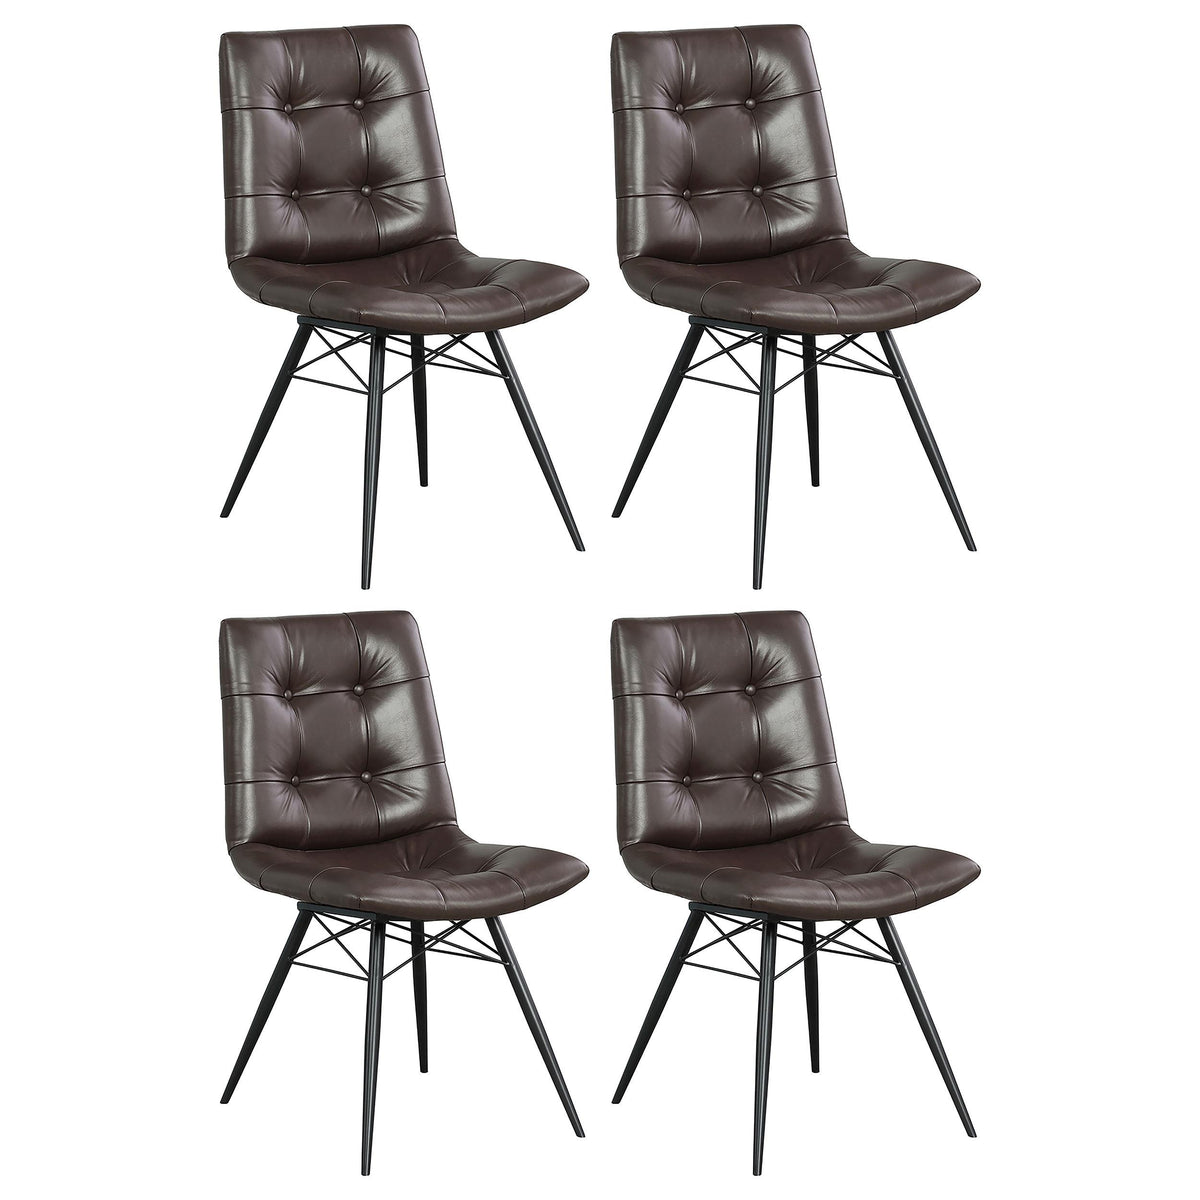 Aiken Upholstered Tufted Side Chairs Brown (Set of 4)  Half Price Furniture